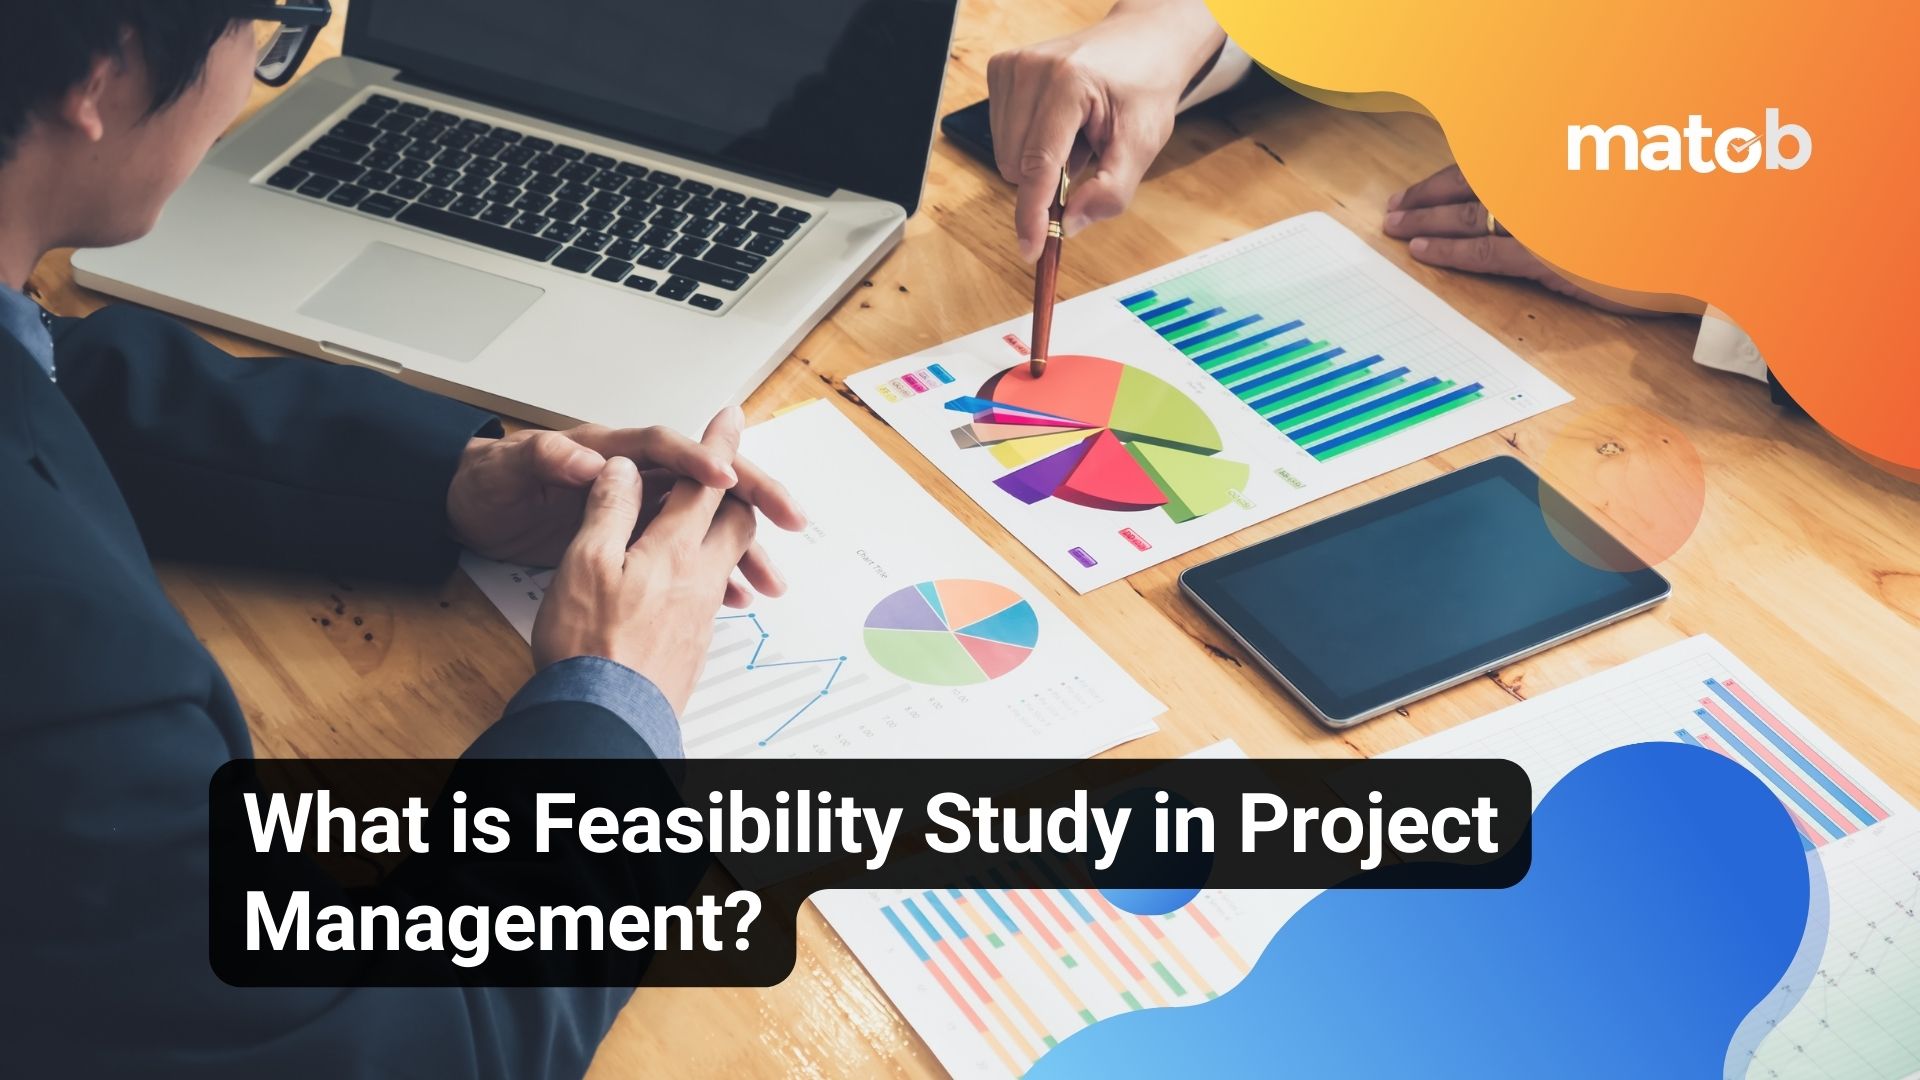 What is Feasibility Study in Project Management?